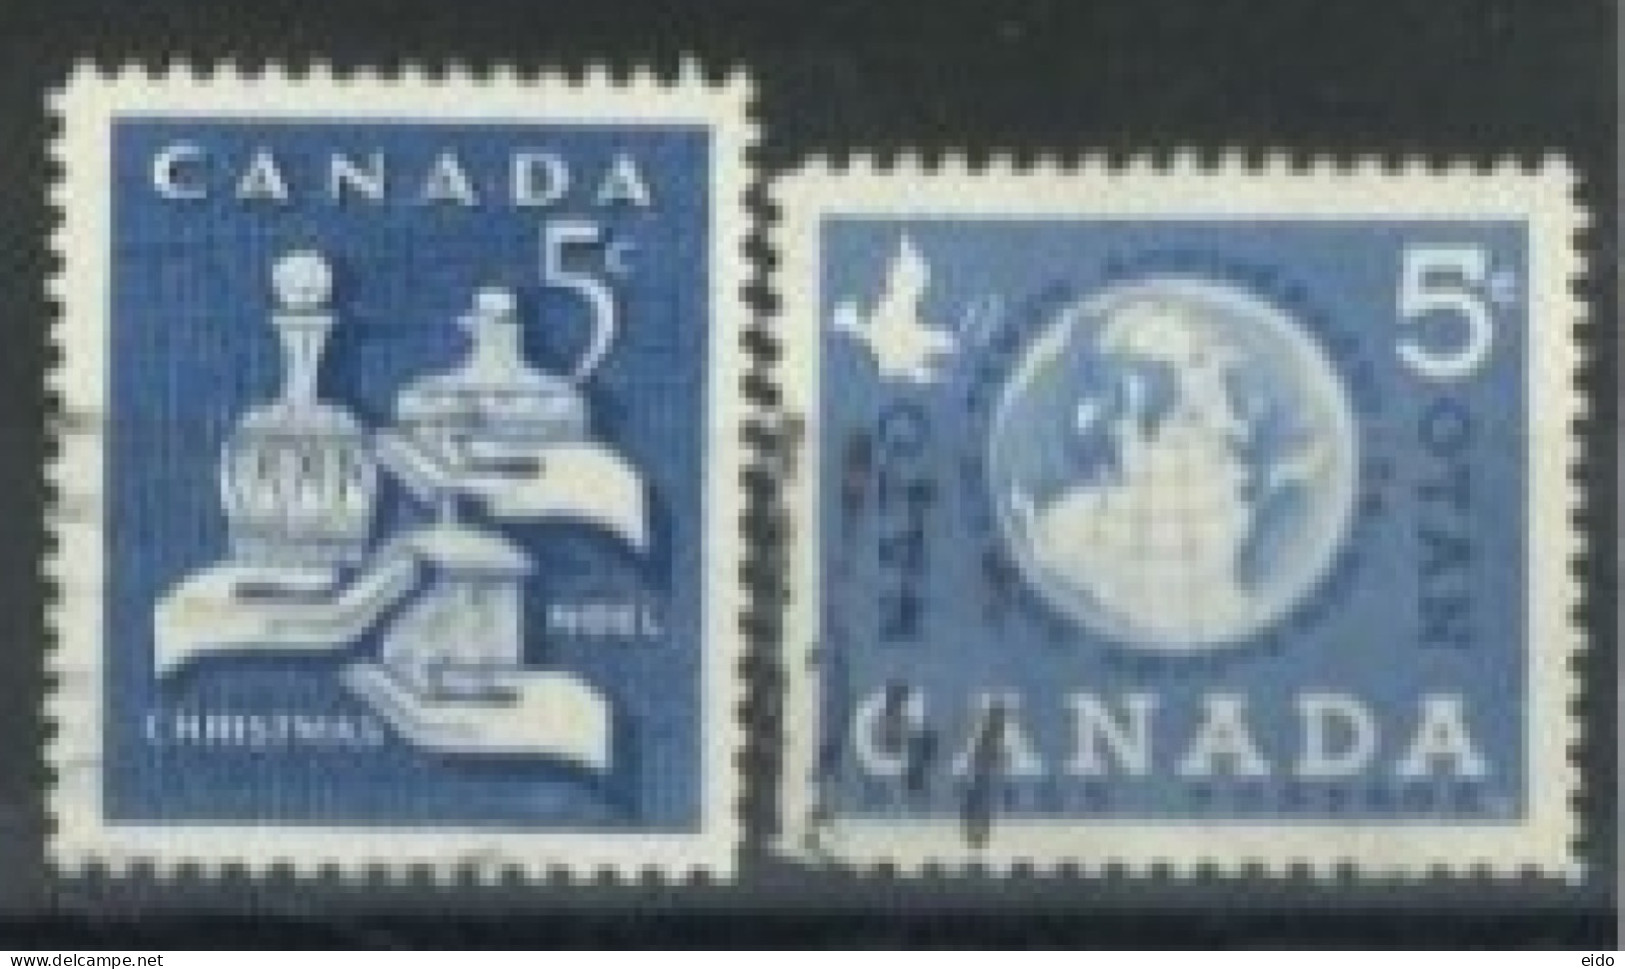 CANADA -  STAMPS SET OF 2, USED. - Gebraucht